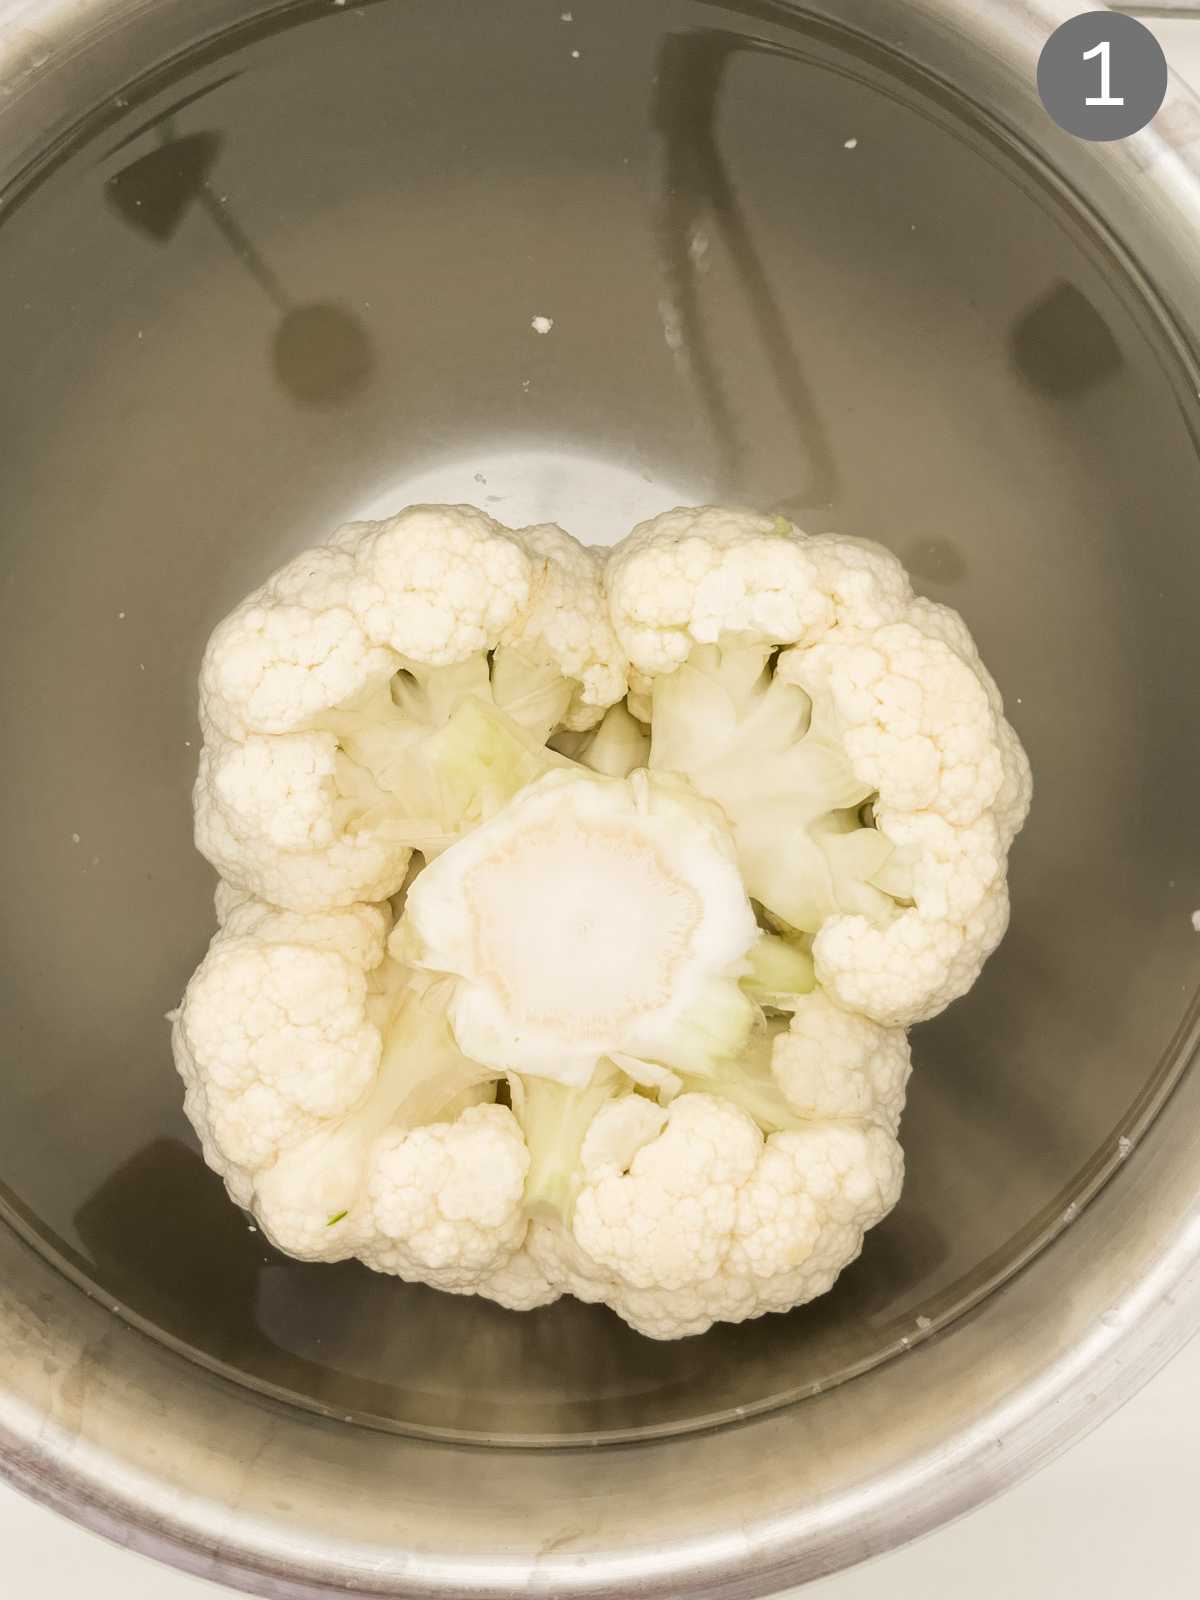 Whole cauliflower head submerged in water in a mixing bowl. 